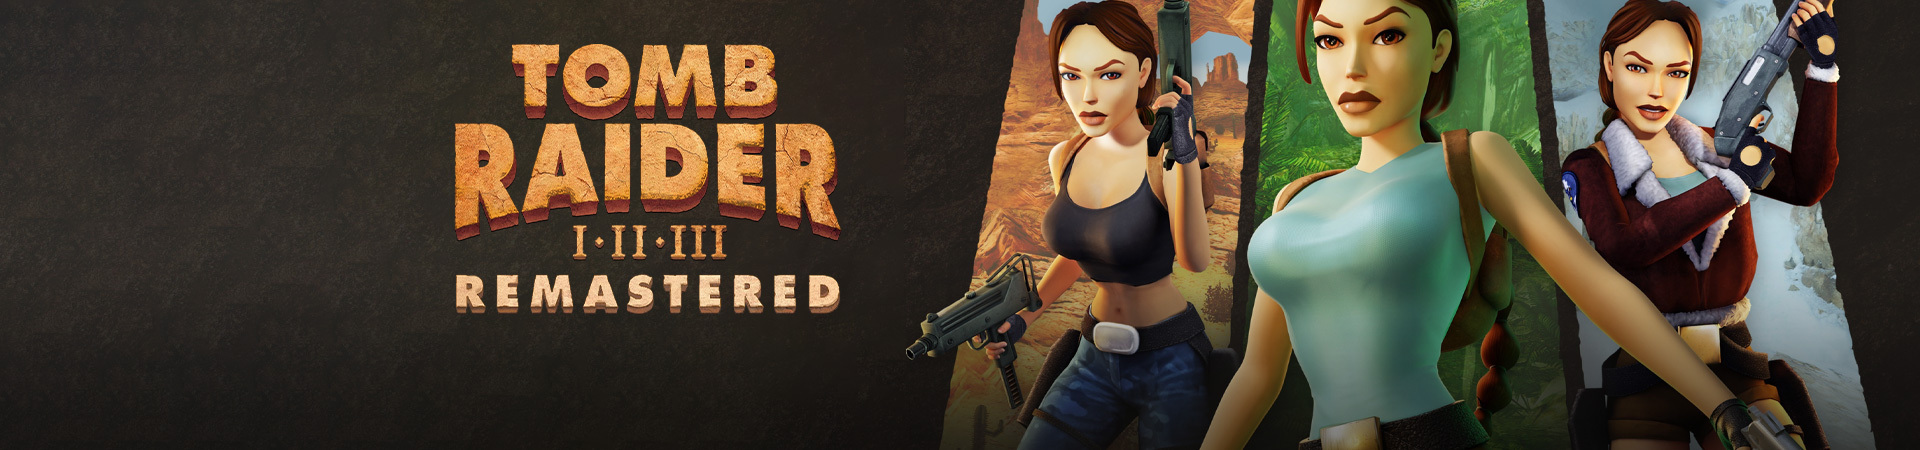 Tomb Raider I-III Remastered - <b><img class="img-dk "  src="/images/icon-serialfor-steam.png" width="" height="" title="Buyers receive a key for Steam to redeem, install &amp; play" /><img class="img-lt "  src="/images/icon-serialfor-steam-lt.png" width="" height="" title="Buyers receive a key for Steam to redeem, install &amp; play" /></b><span> Now available</span>